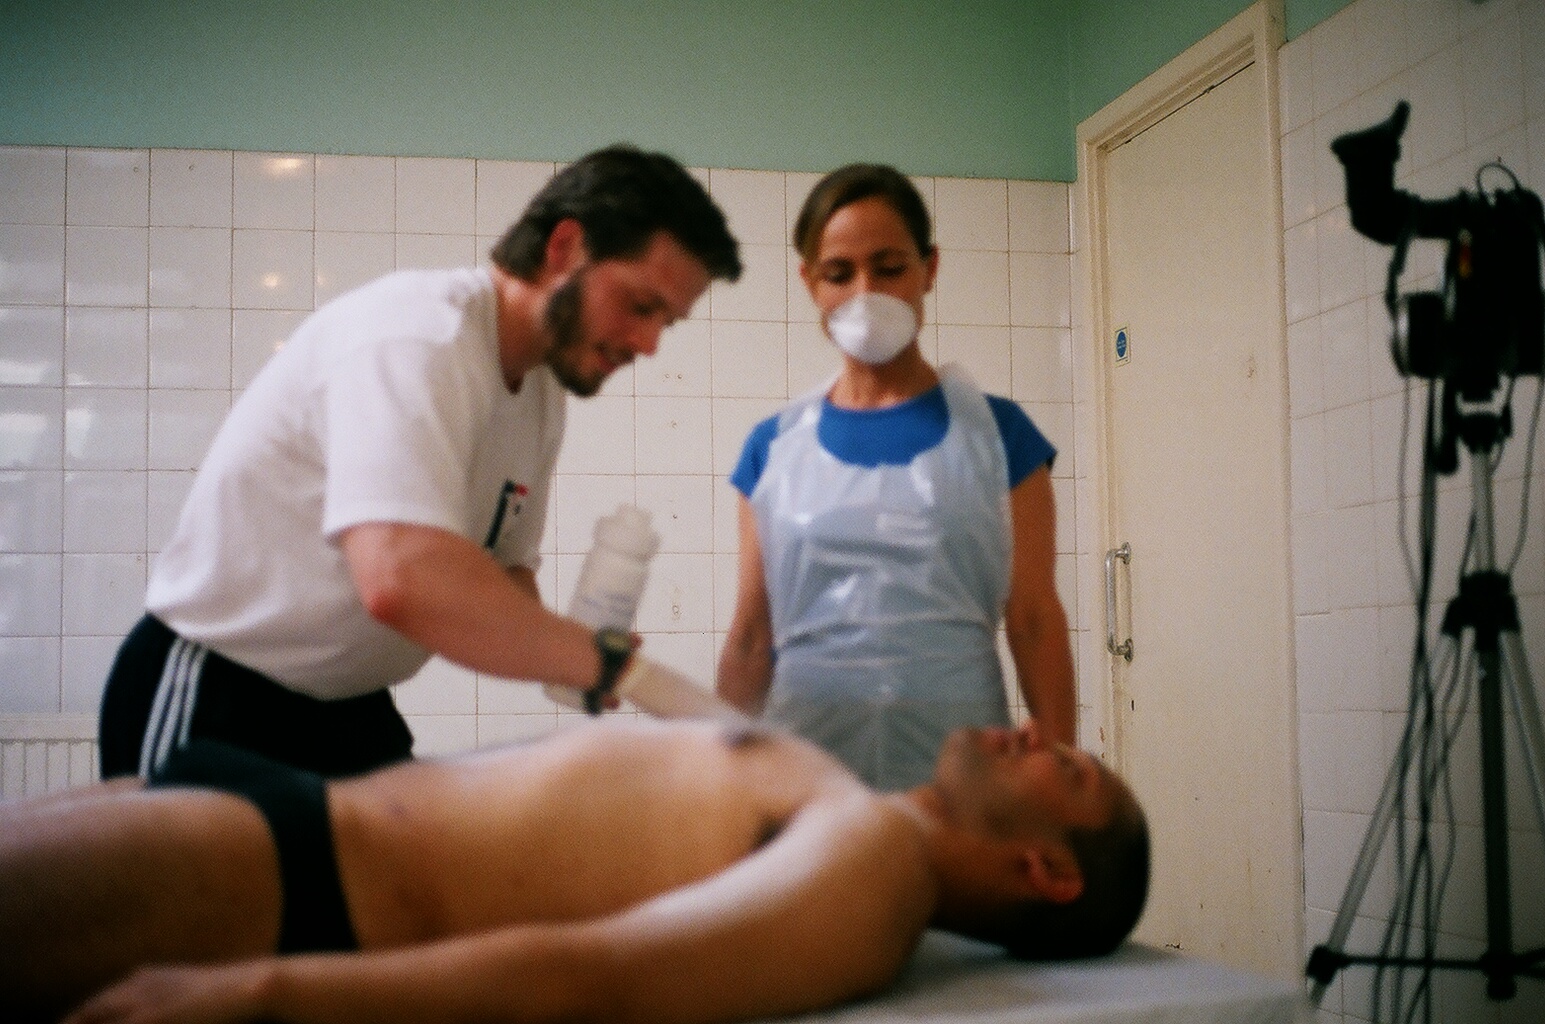 On location shooting 'The Cannibal's Liver' with Michella Warren and Kevin Mangar 2007